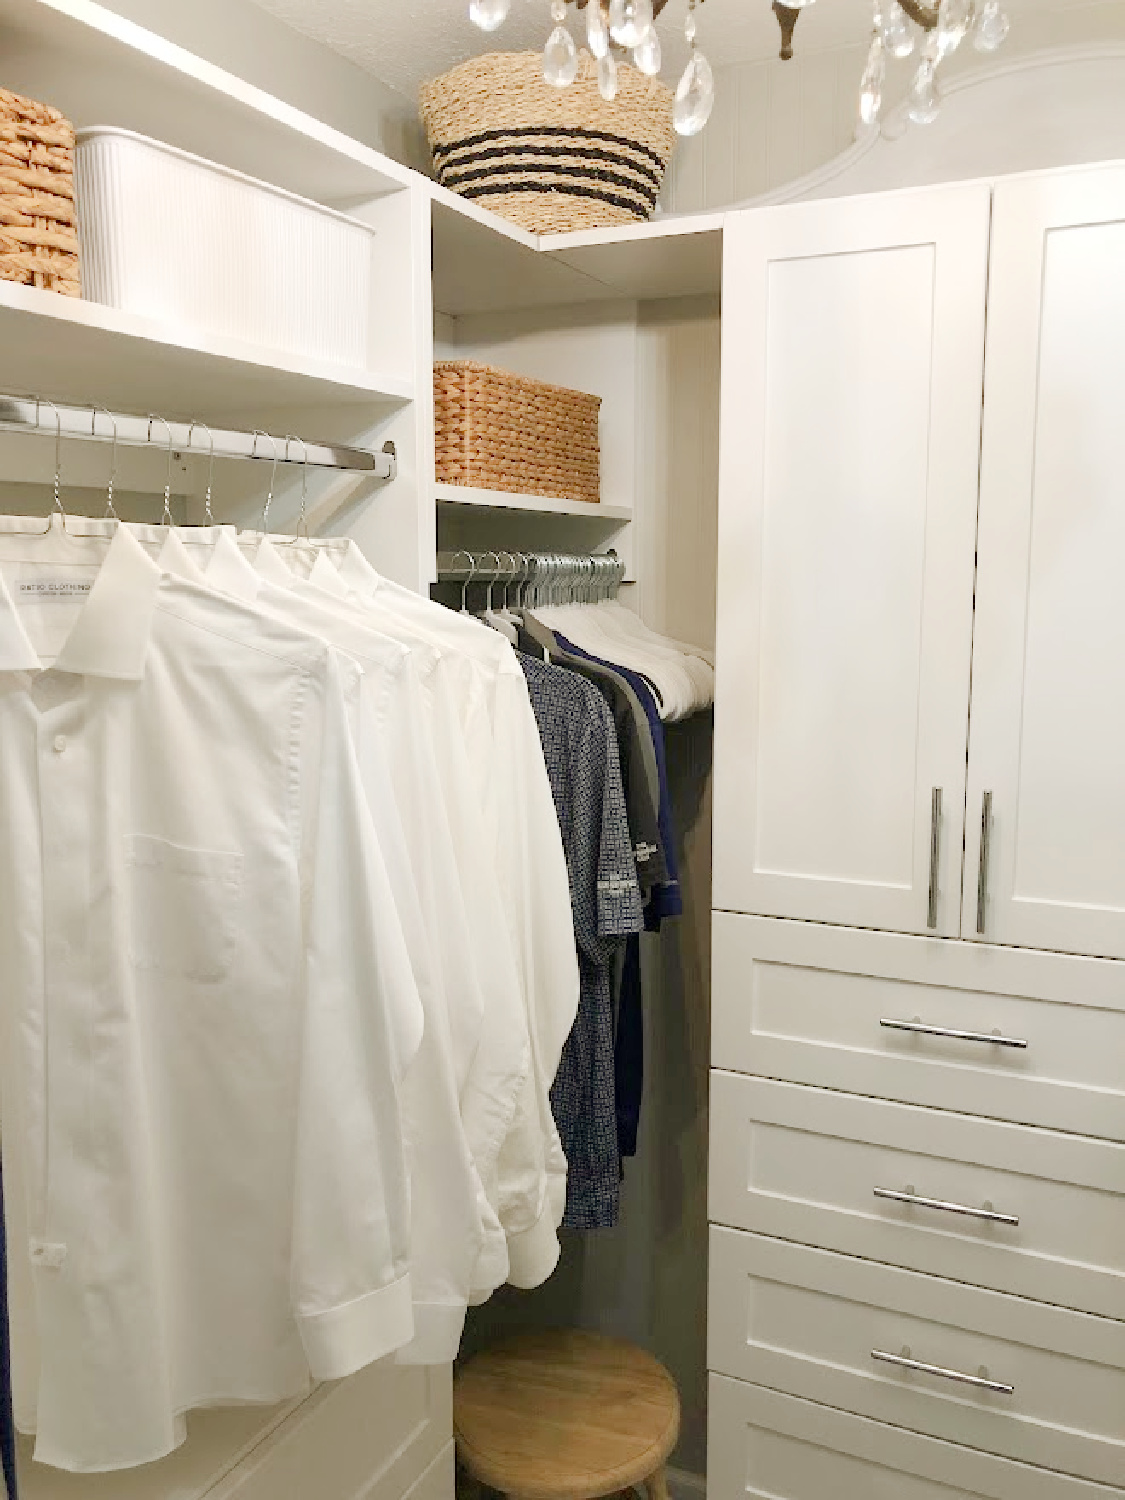 Hello Lovely's closet makeover - I love mixing natural materials and warmth with the beauty and neutrality of white. Come see the before/after of this DIY closet project with Modular Closets. #diyclosets #customclosetdiy #whiteshakerclosets